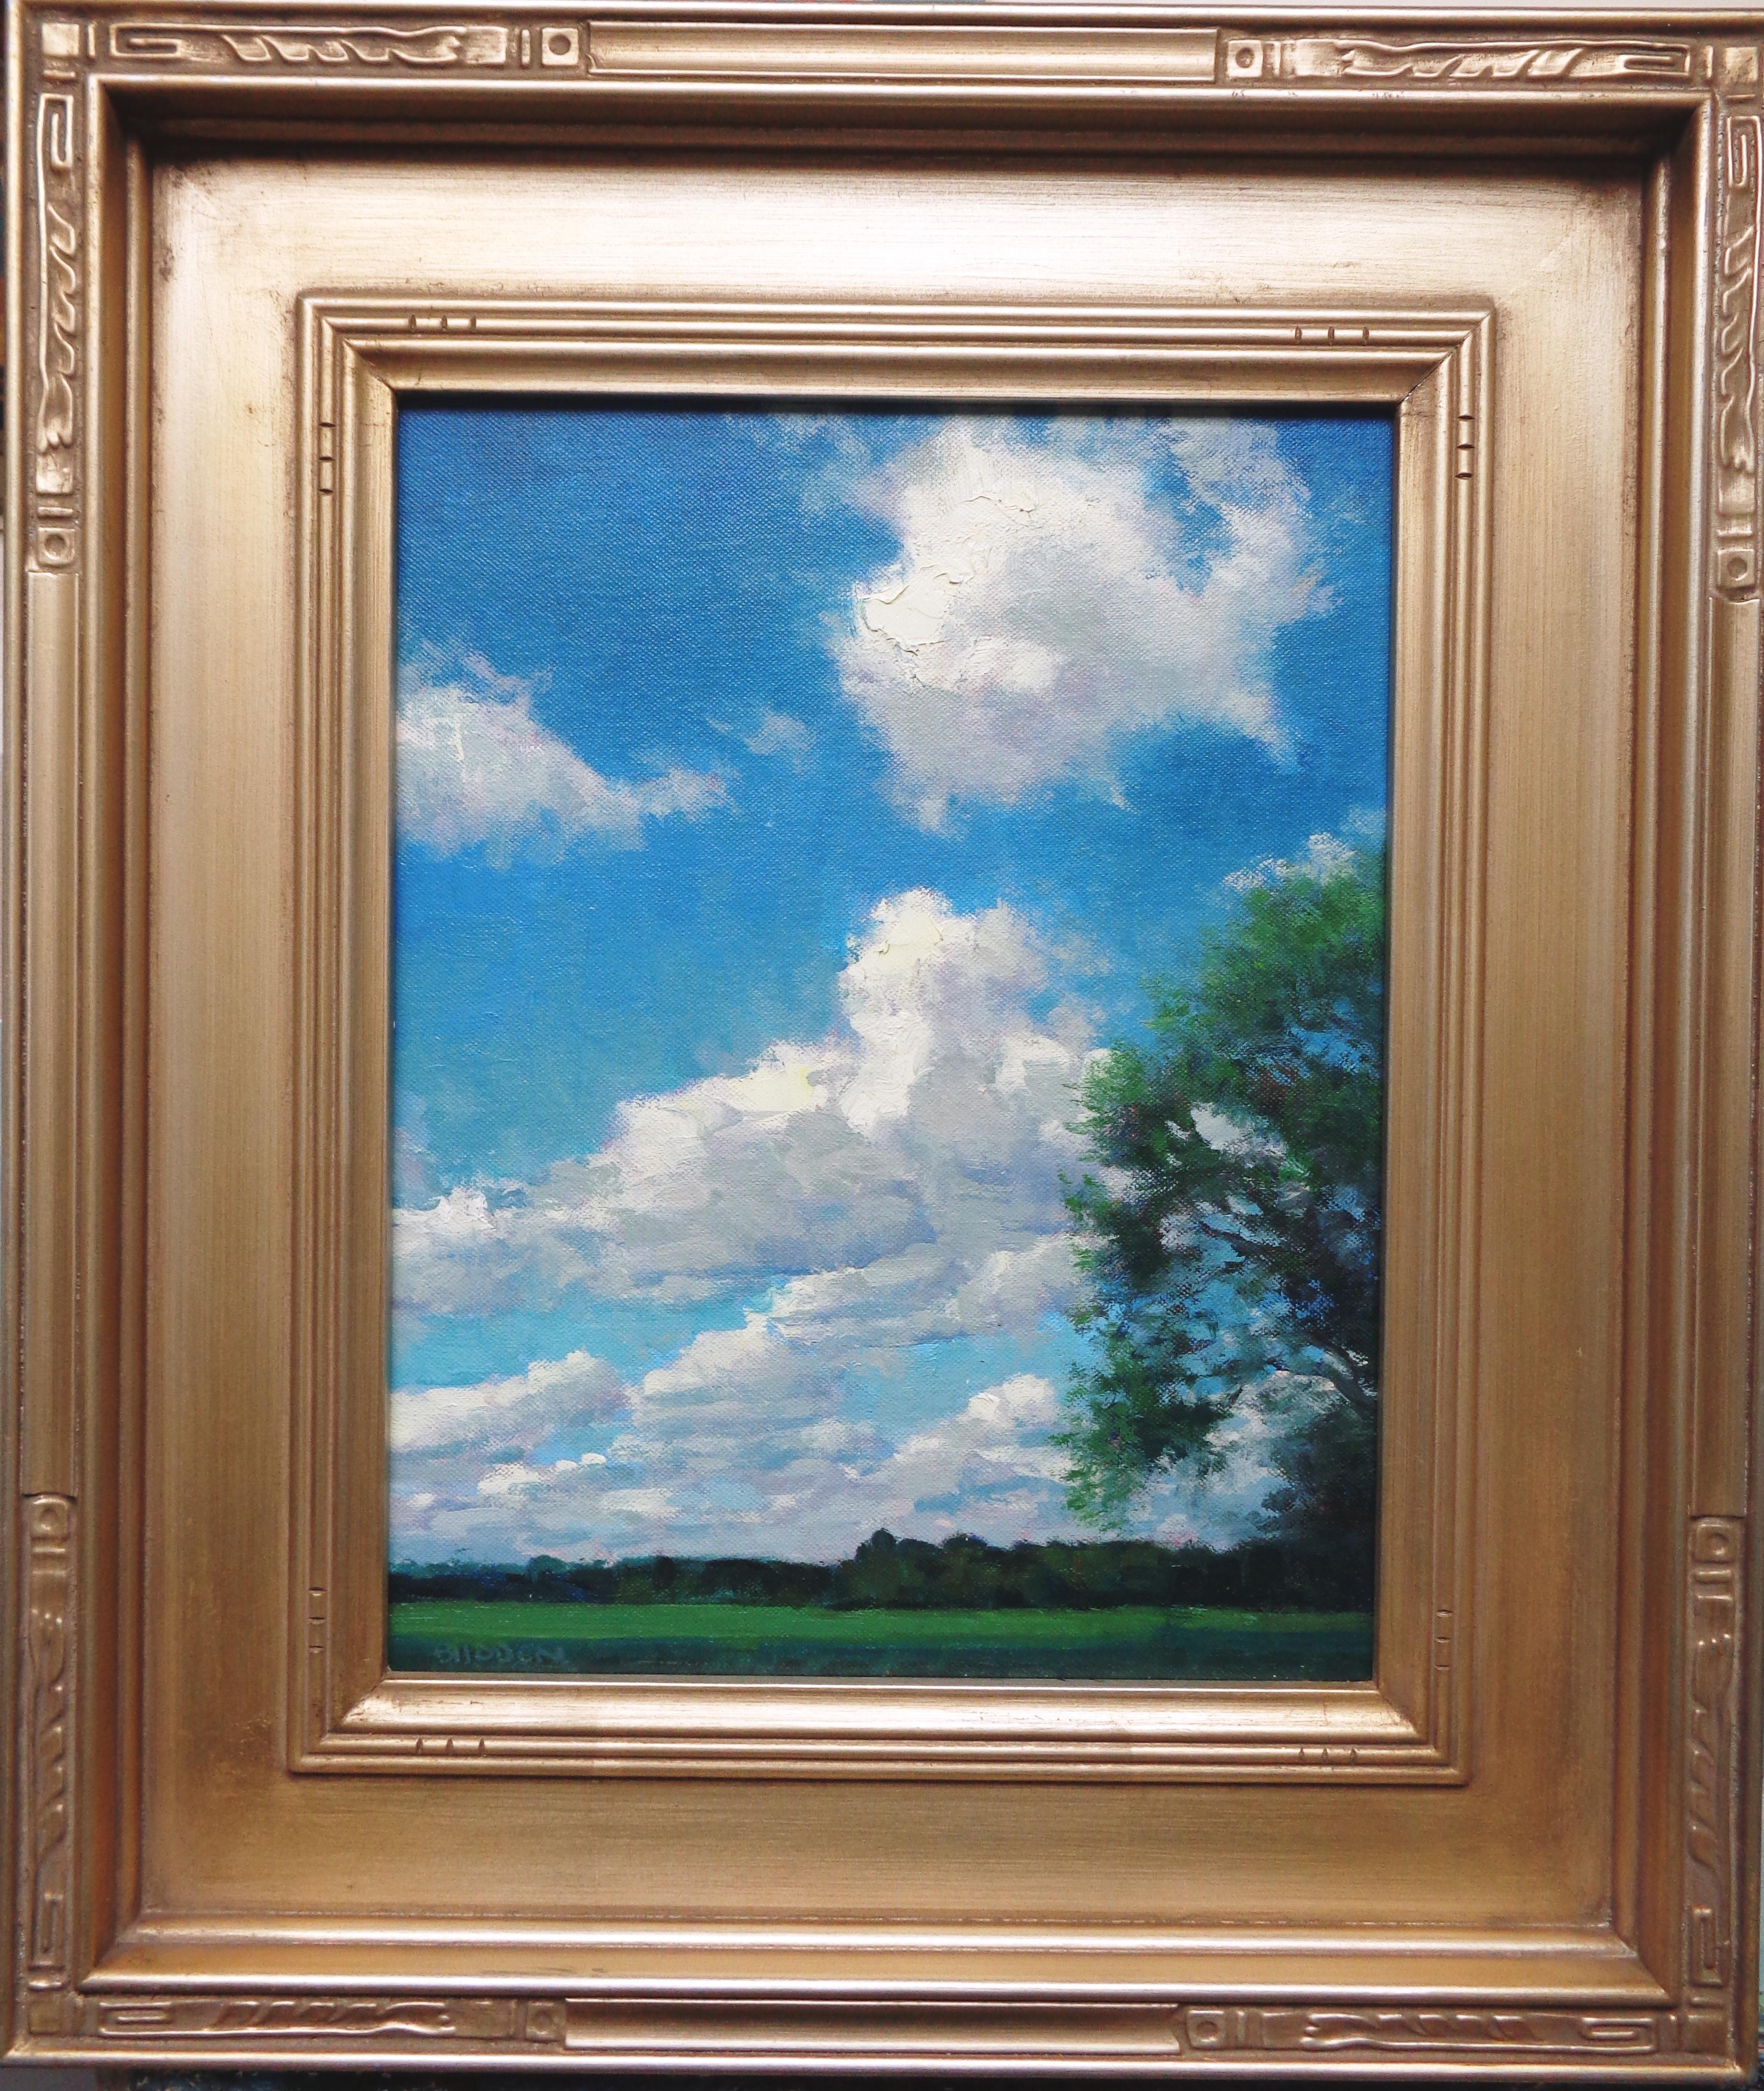 Summer Sky. An oil painting on canvas that showcases the beautiful light of a summer day shinning on a view of sky and clouds. This painting was painted en plein air on location in an Impressionistic style and is being sold unframed.

ARTIST'S